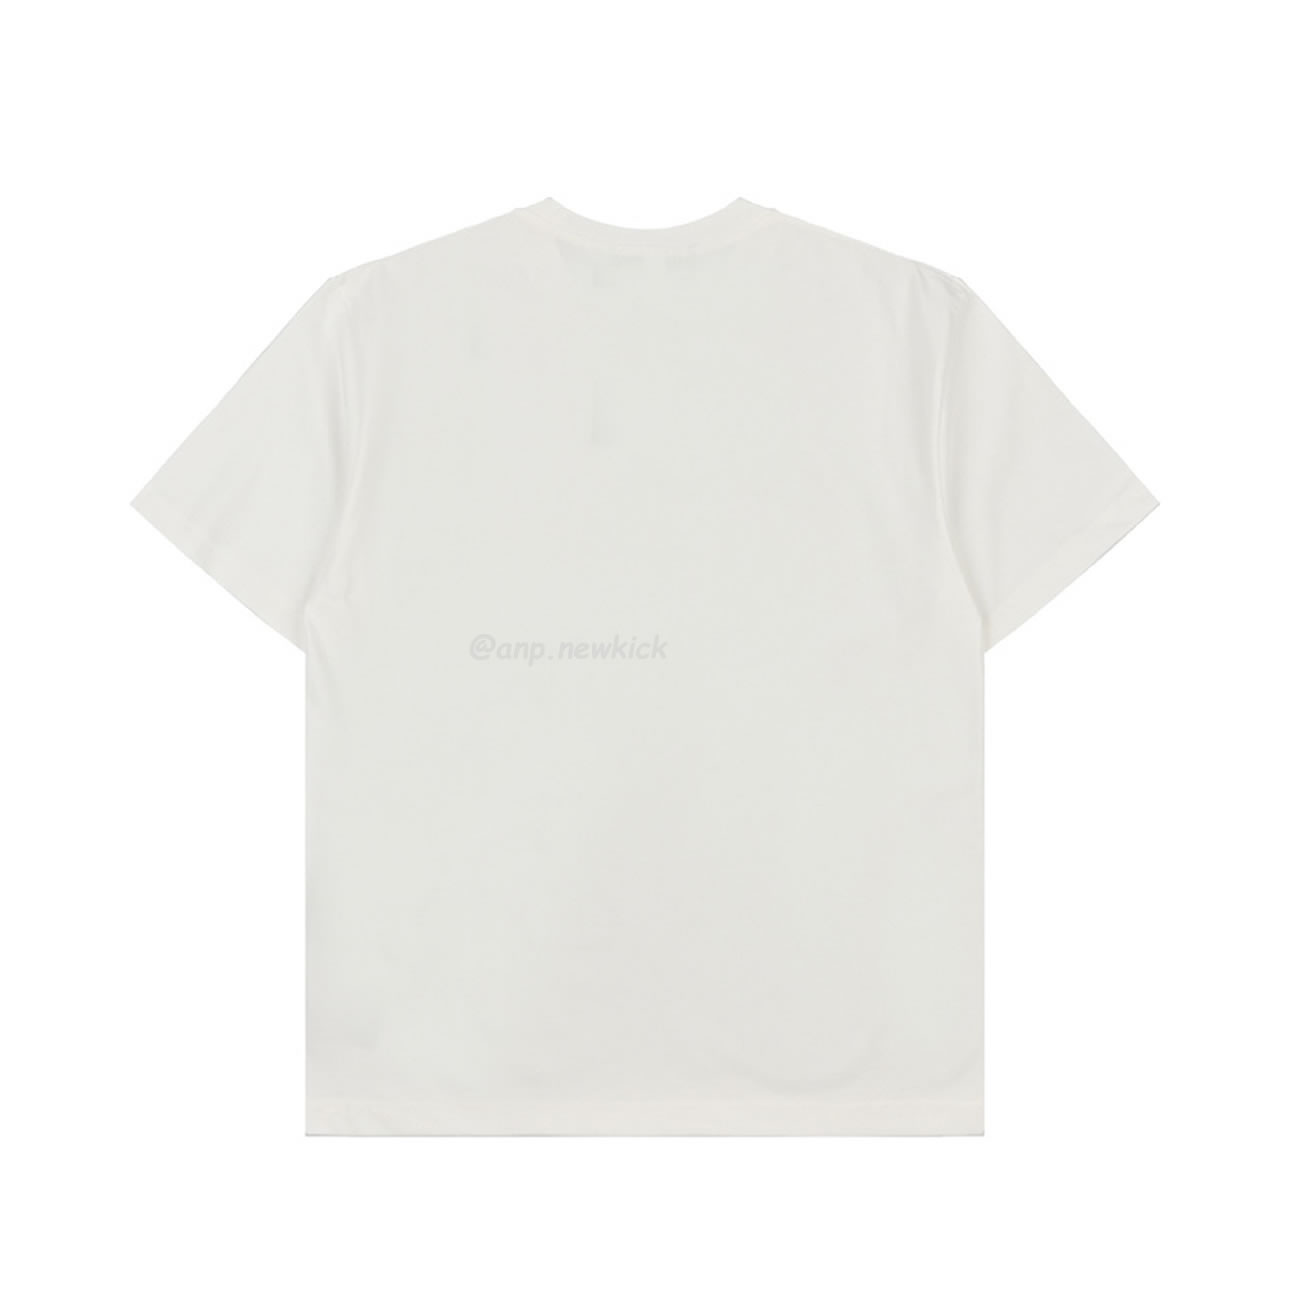 Prada 24ss 3d Toothbrush Embroidered Short Sleeves T Shirt (3) - newkick.org